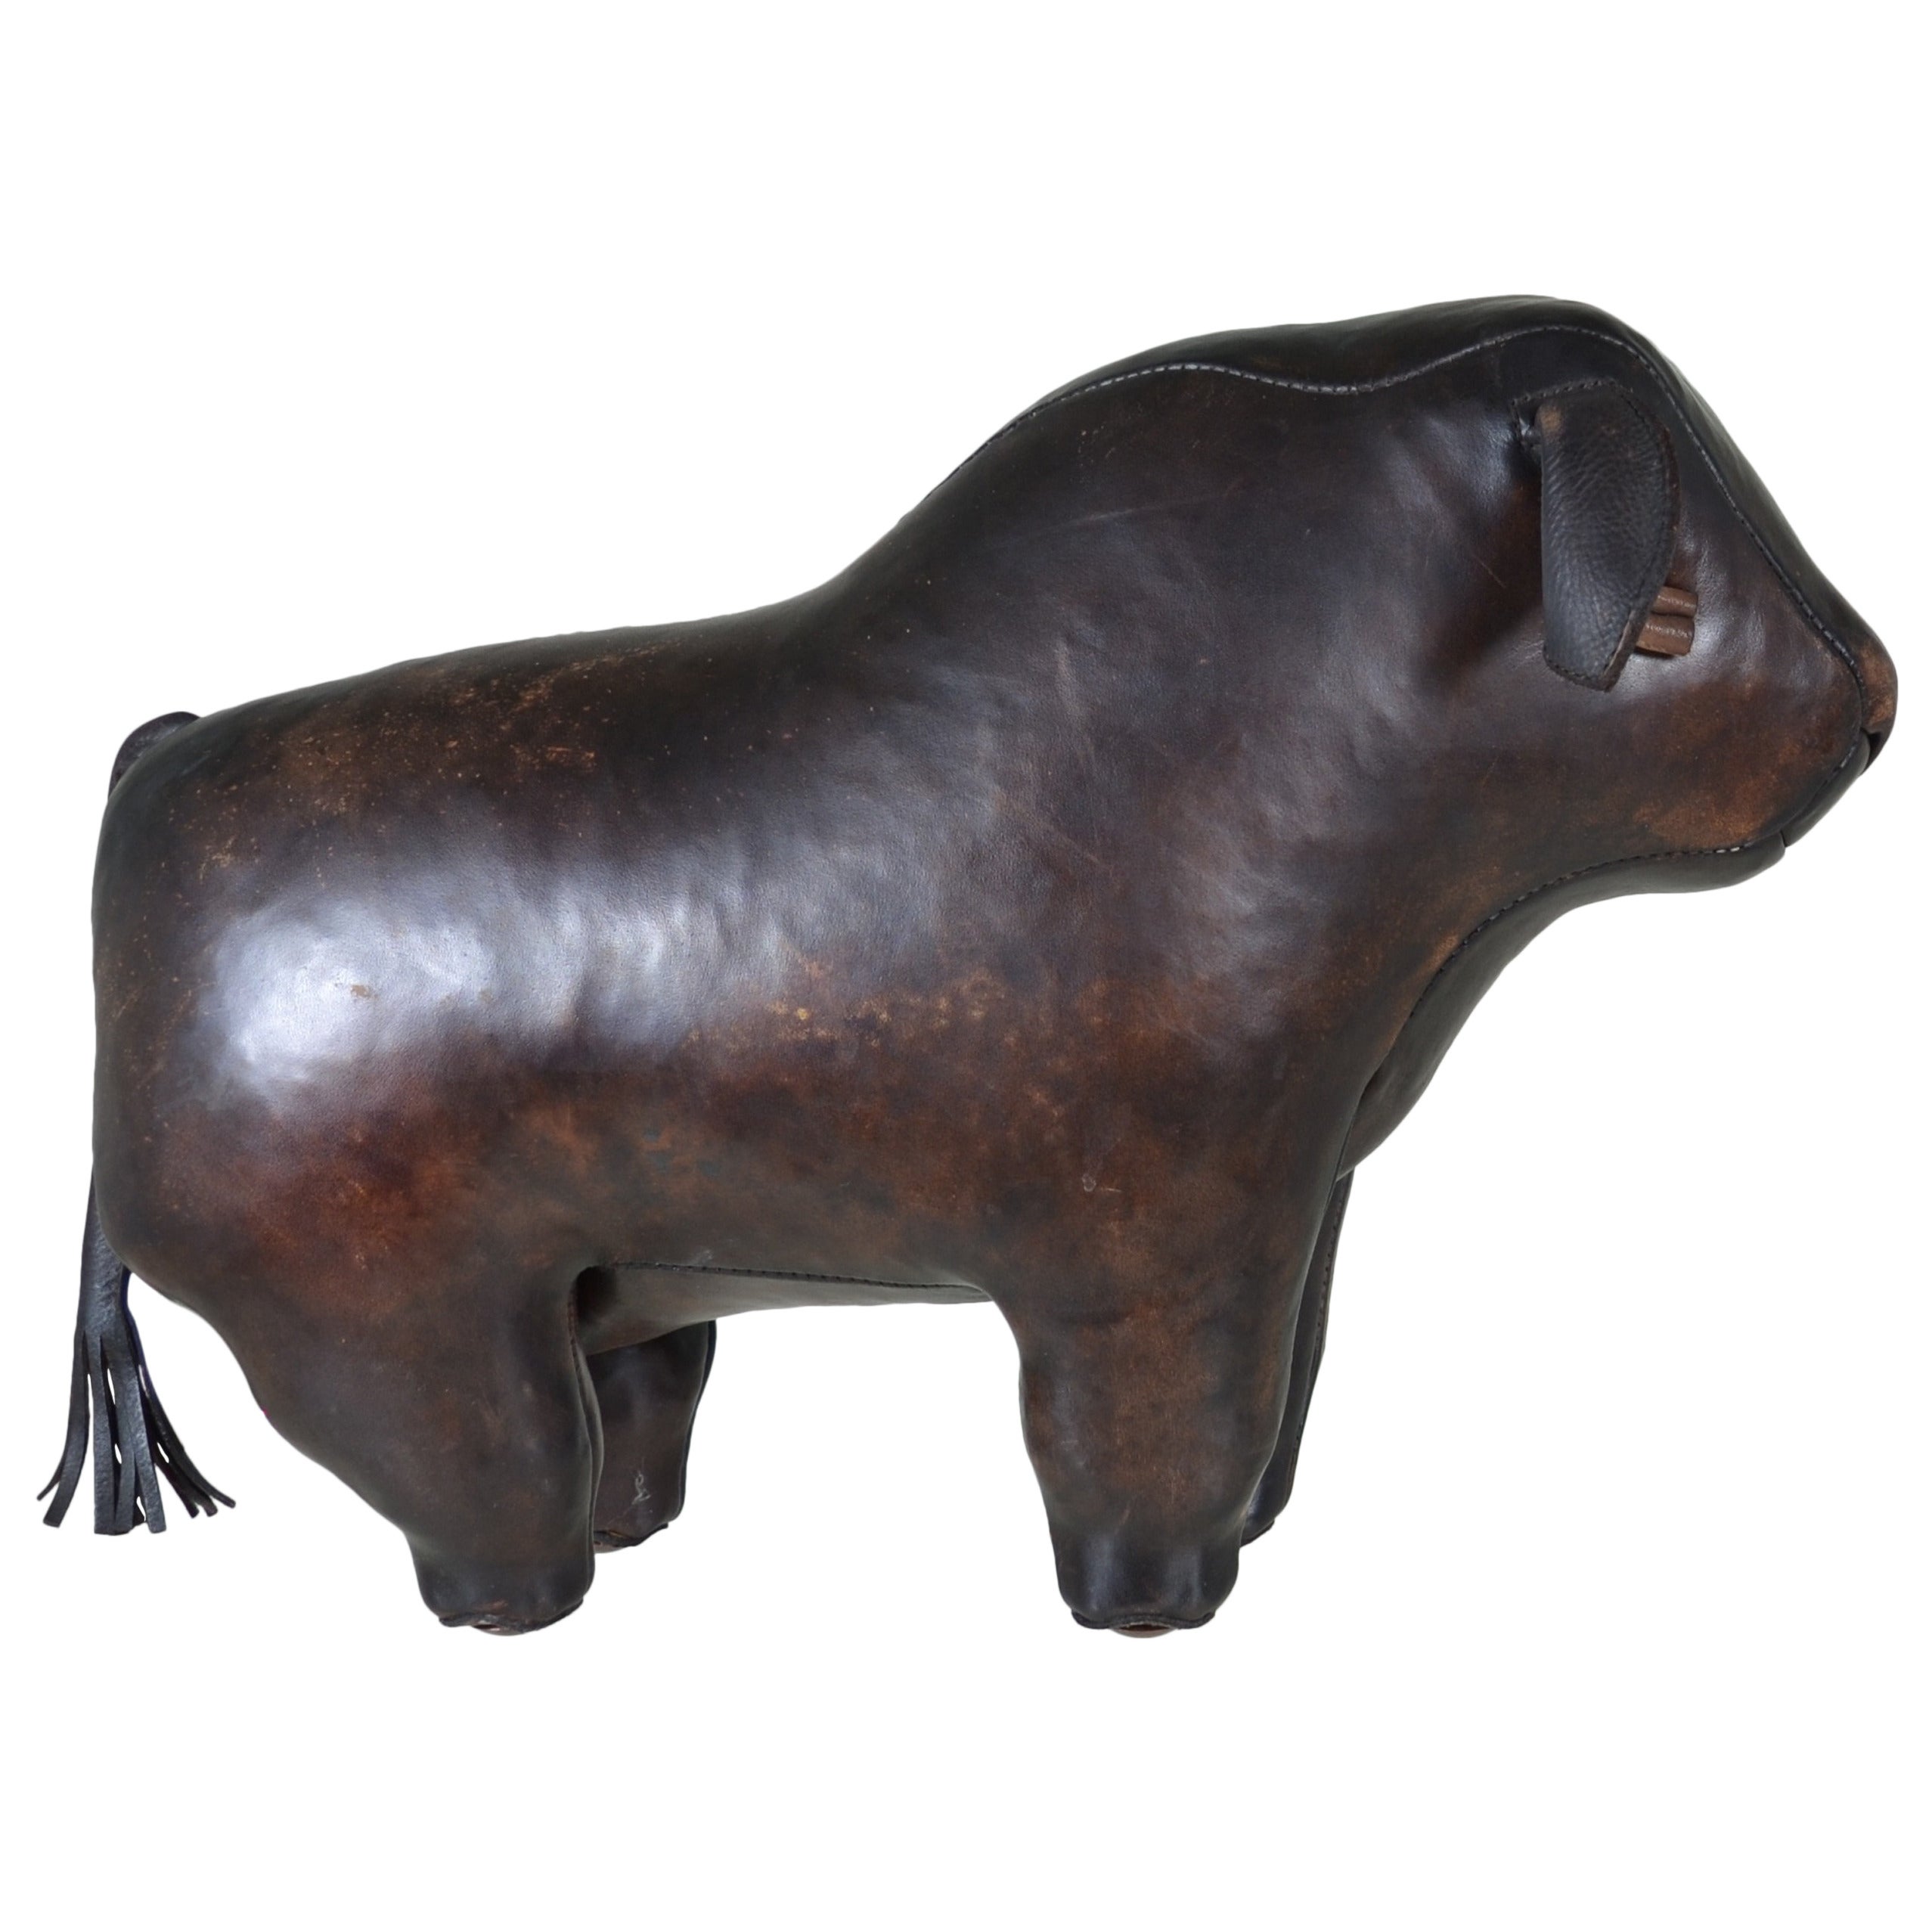 Leather Bull Made by Omersa and Company for Abercrombie & Fitch